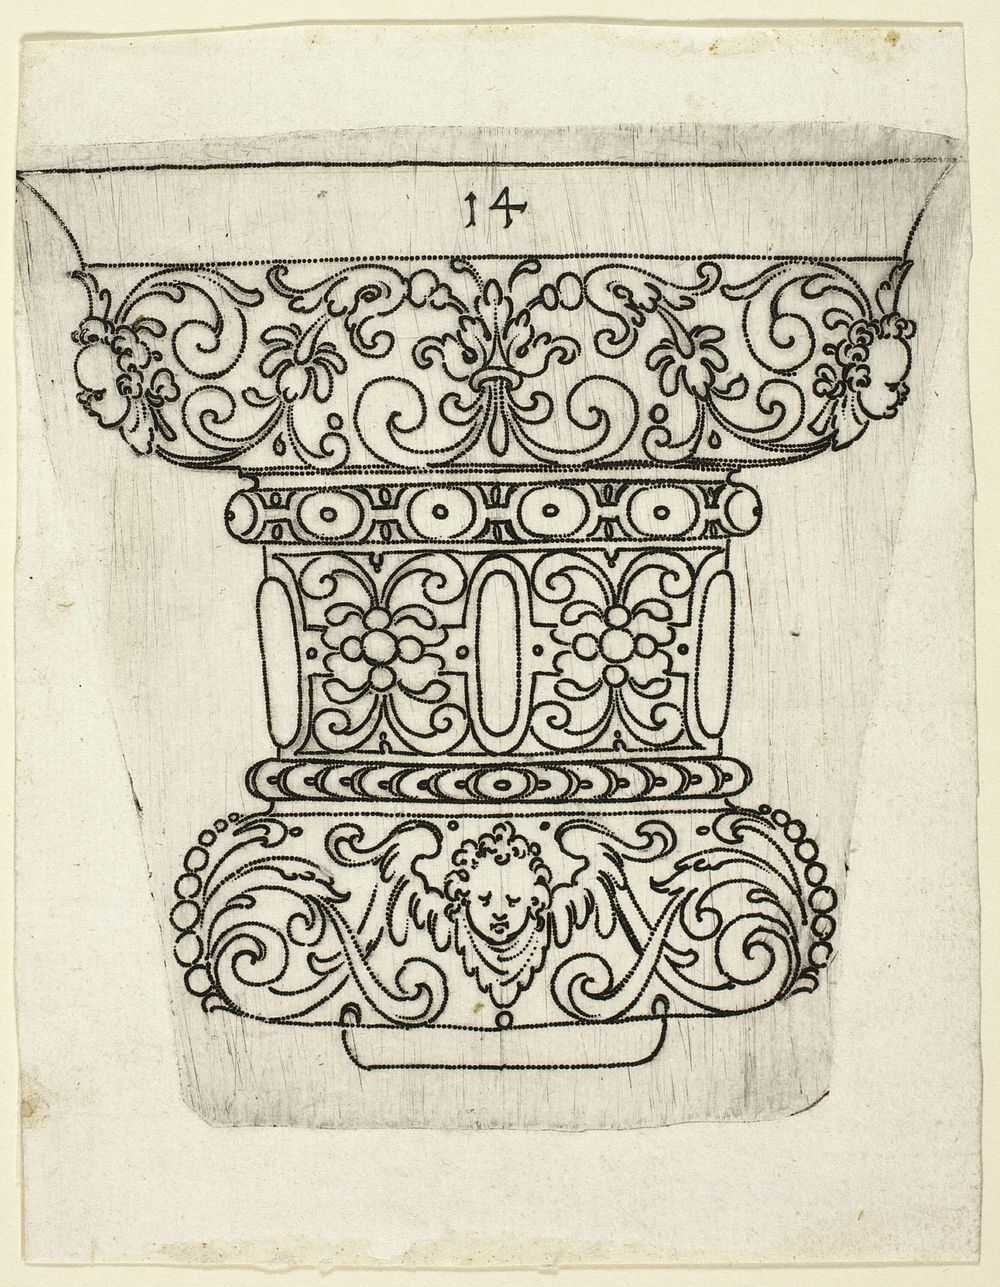 Plate 14, from XX Stuck zum (ornamental designs for goblets and beakers) by Master A.P.